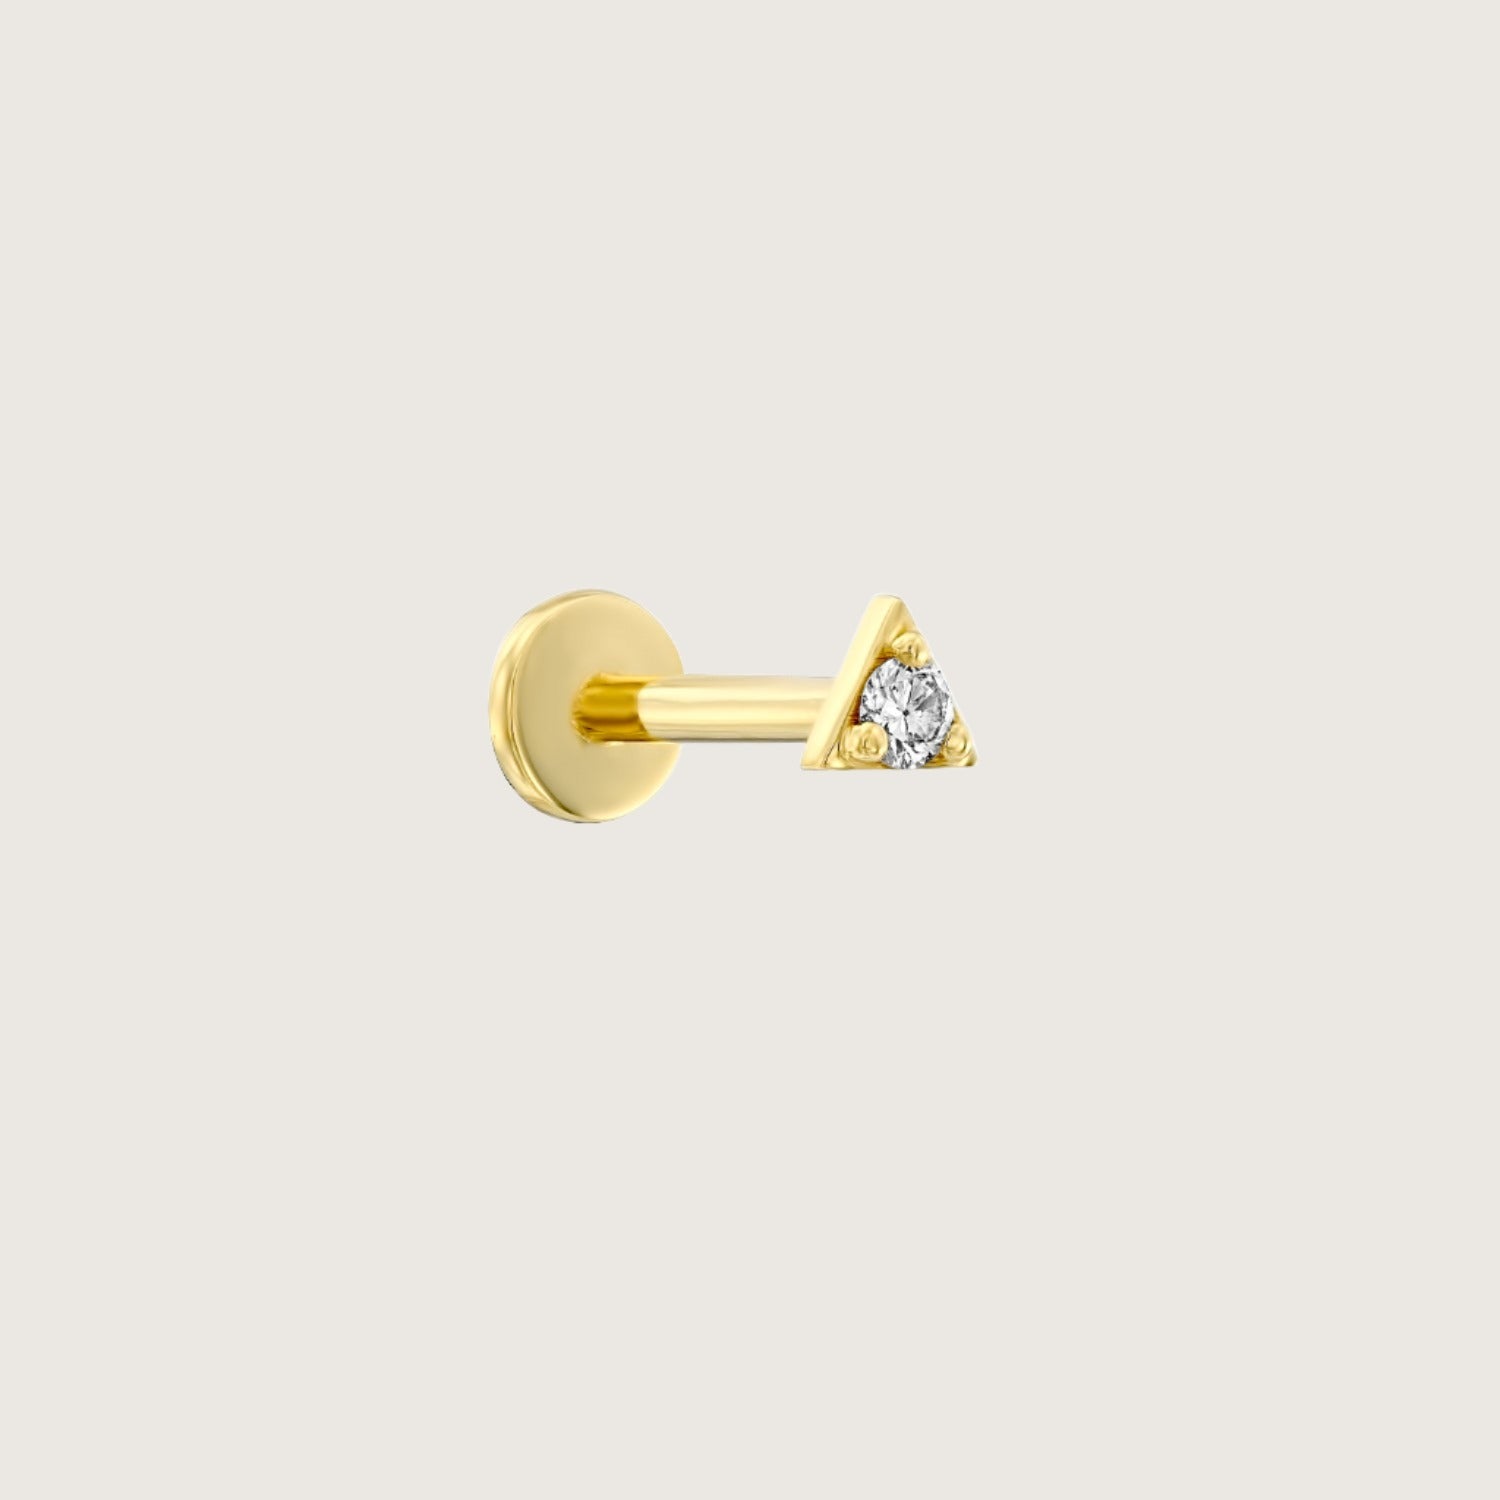 Ruth piercing earring with white diamond